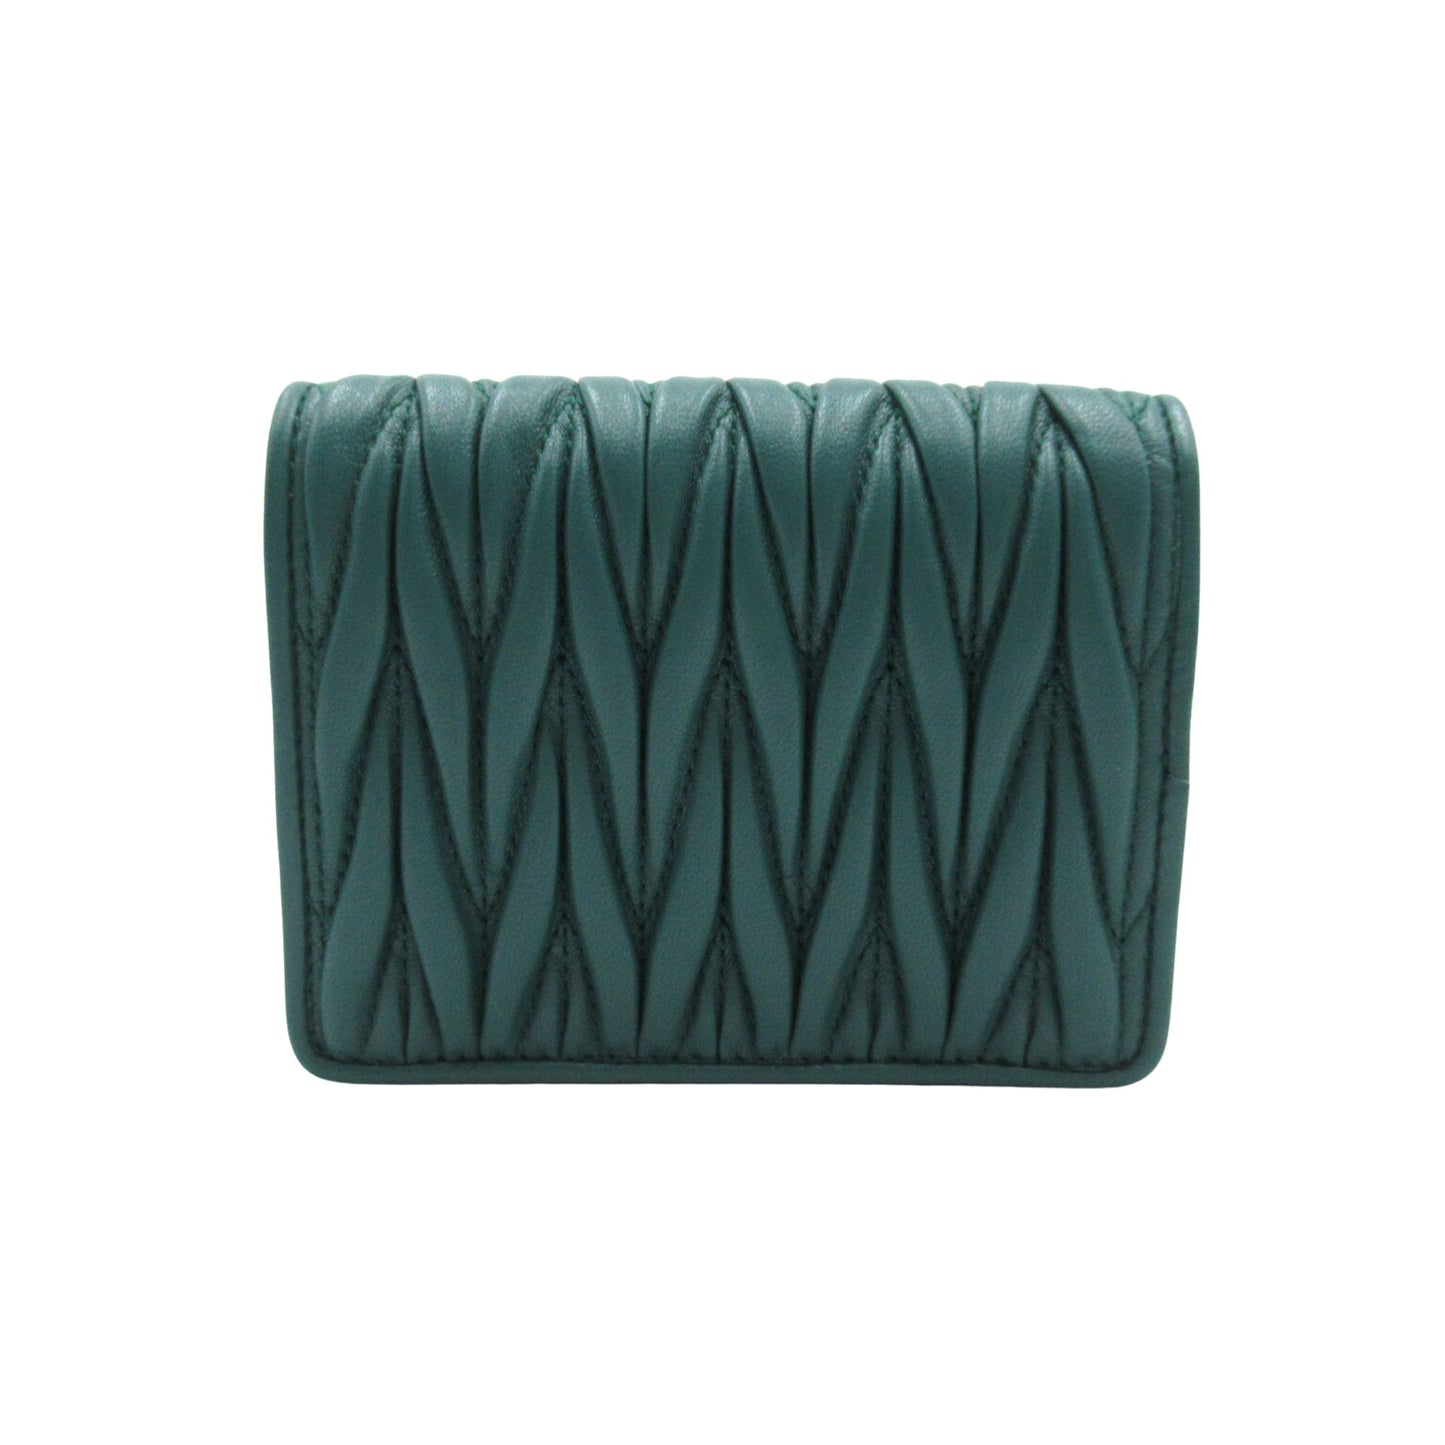 Miu Miu Unisex Green Leather Bifold Wallet with Spacious Interior in Green